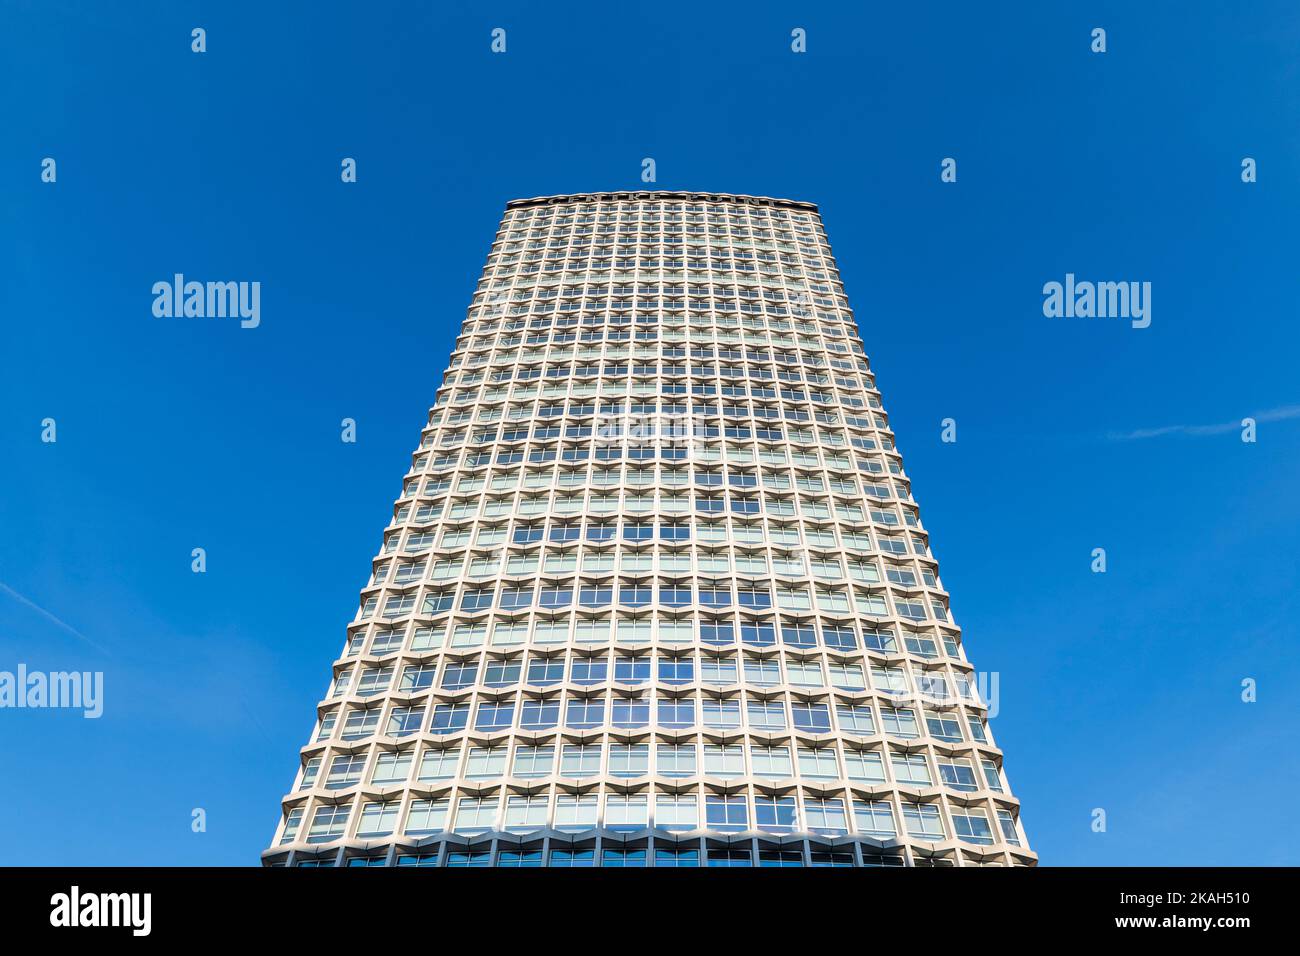 Centre Point skyscraper, at the junction of Charing Cross Road, Oxford Street, Tottenham Court Road and New Oxford Street, London, UK.  The 117 m (385 Stock Photo